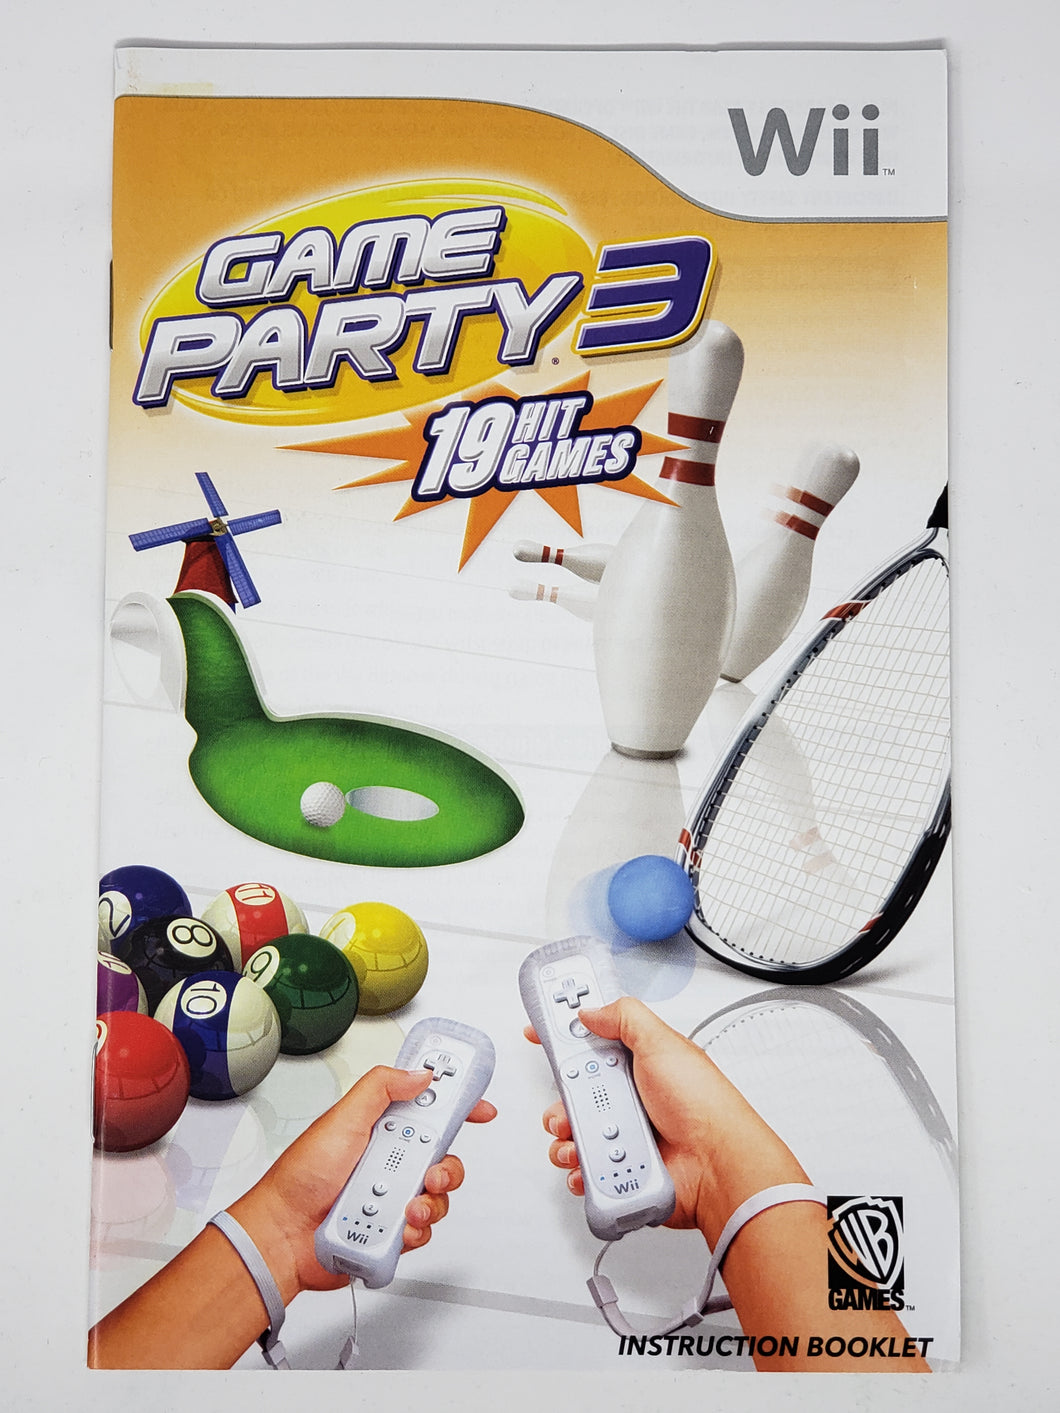 Game Party 3 [manual] - Nintendo Wii